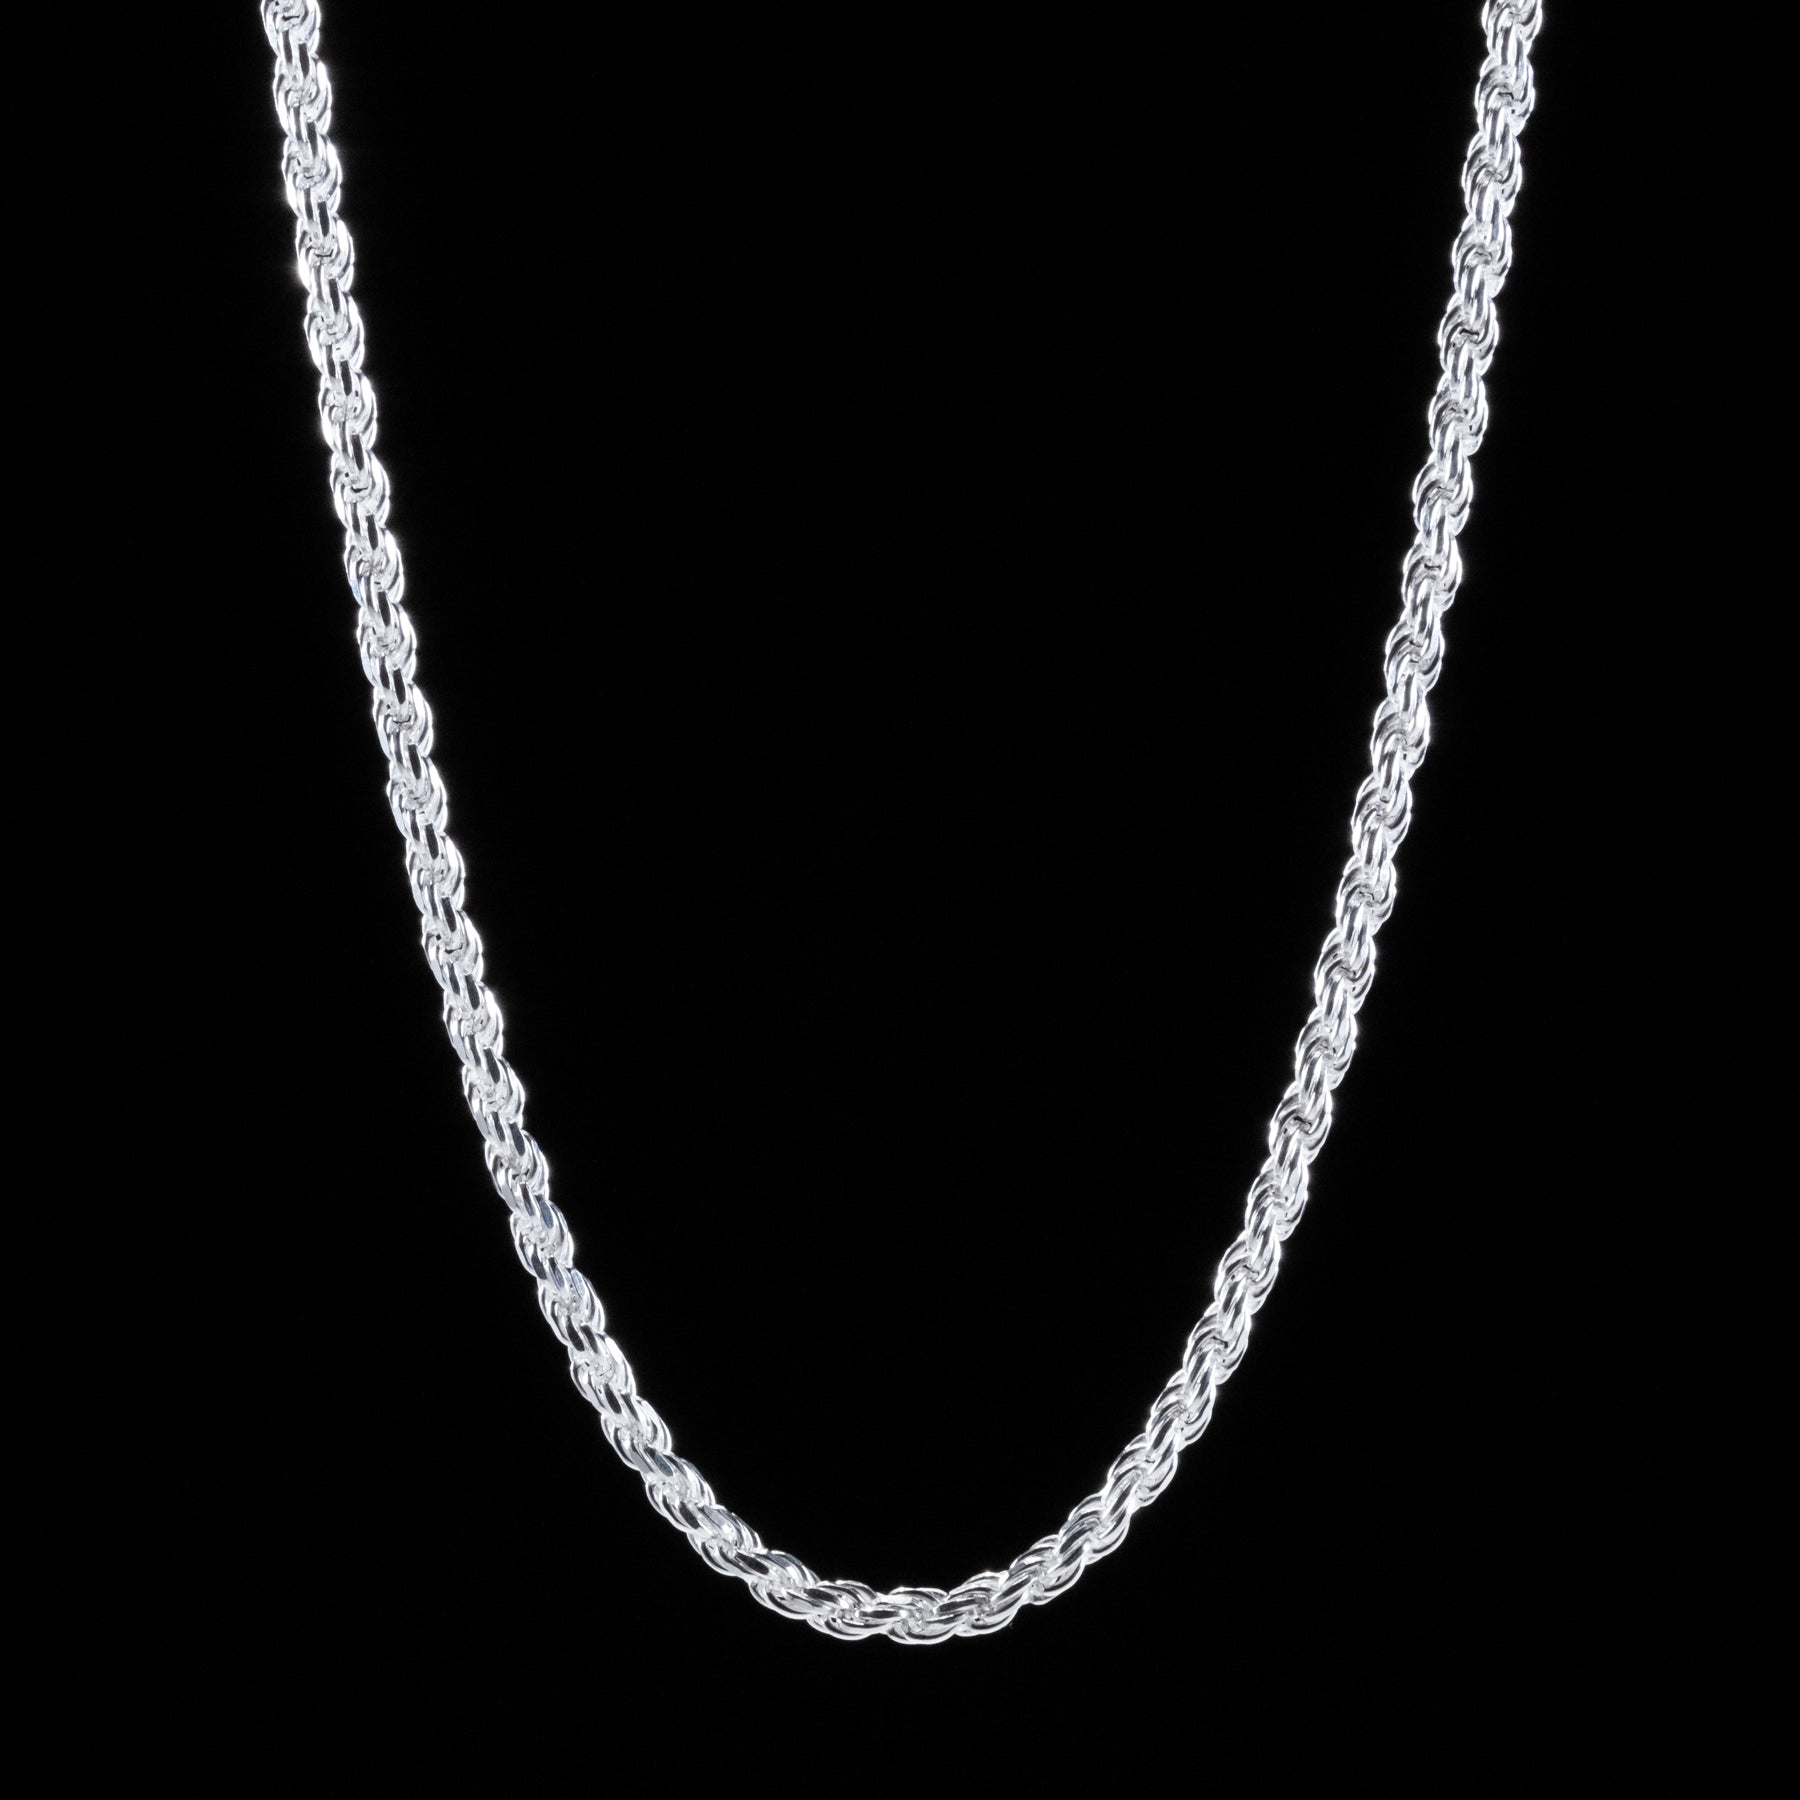  Sterling Silver Chain